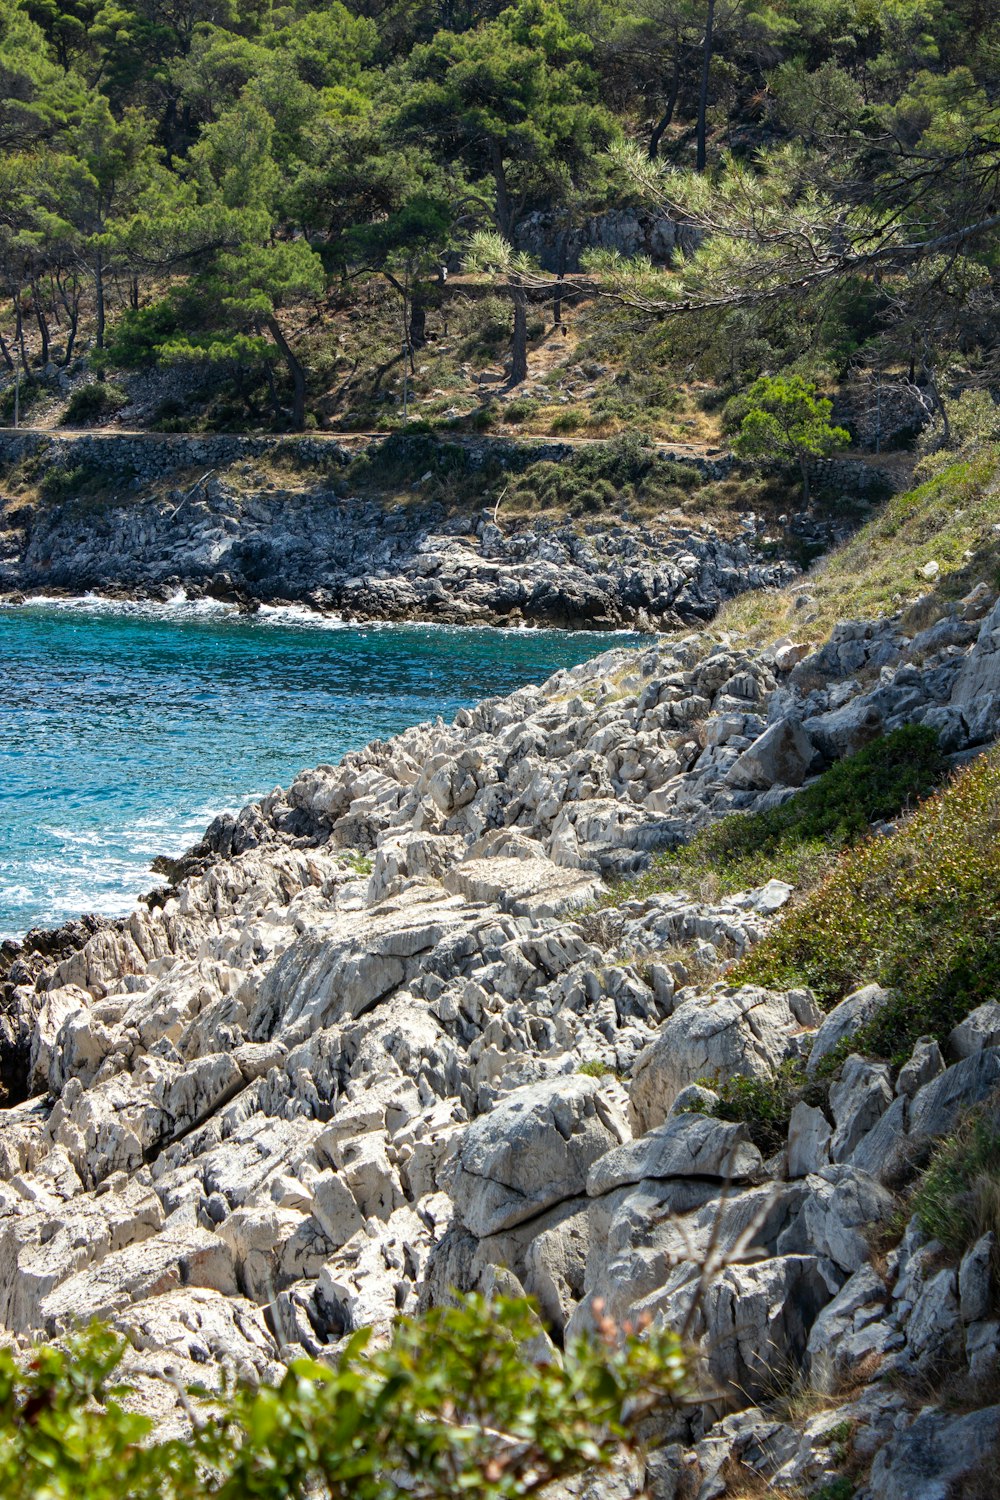 a rocky beach with trees and a body of water